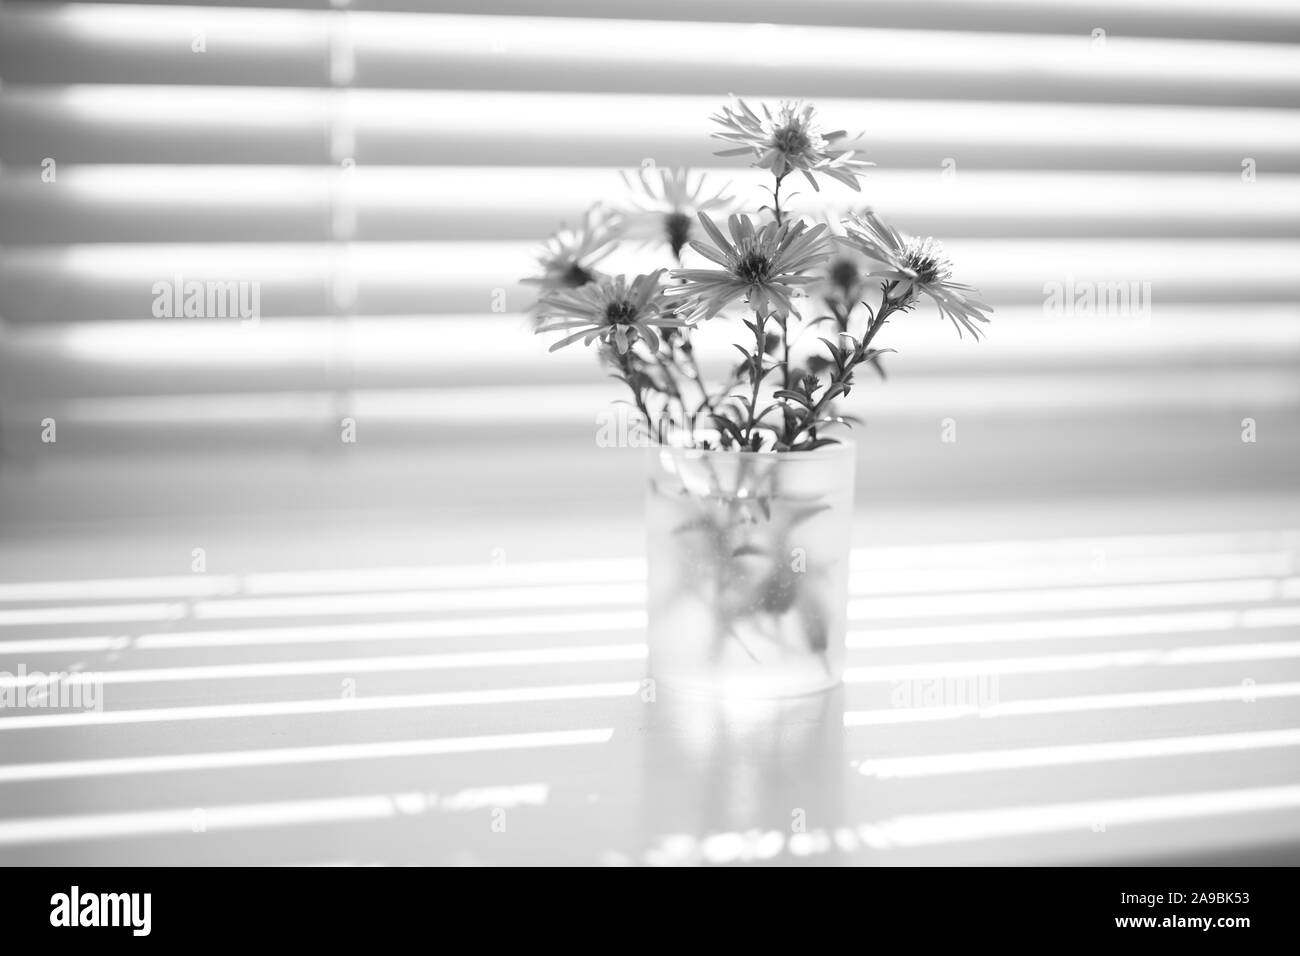 Lovely small bouquet of chrysanthemums on the windowsill, bw photo. Stock Photo